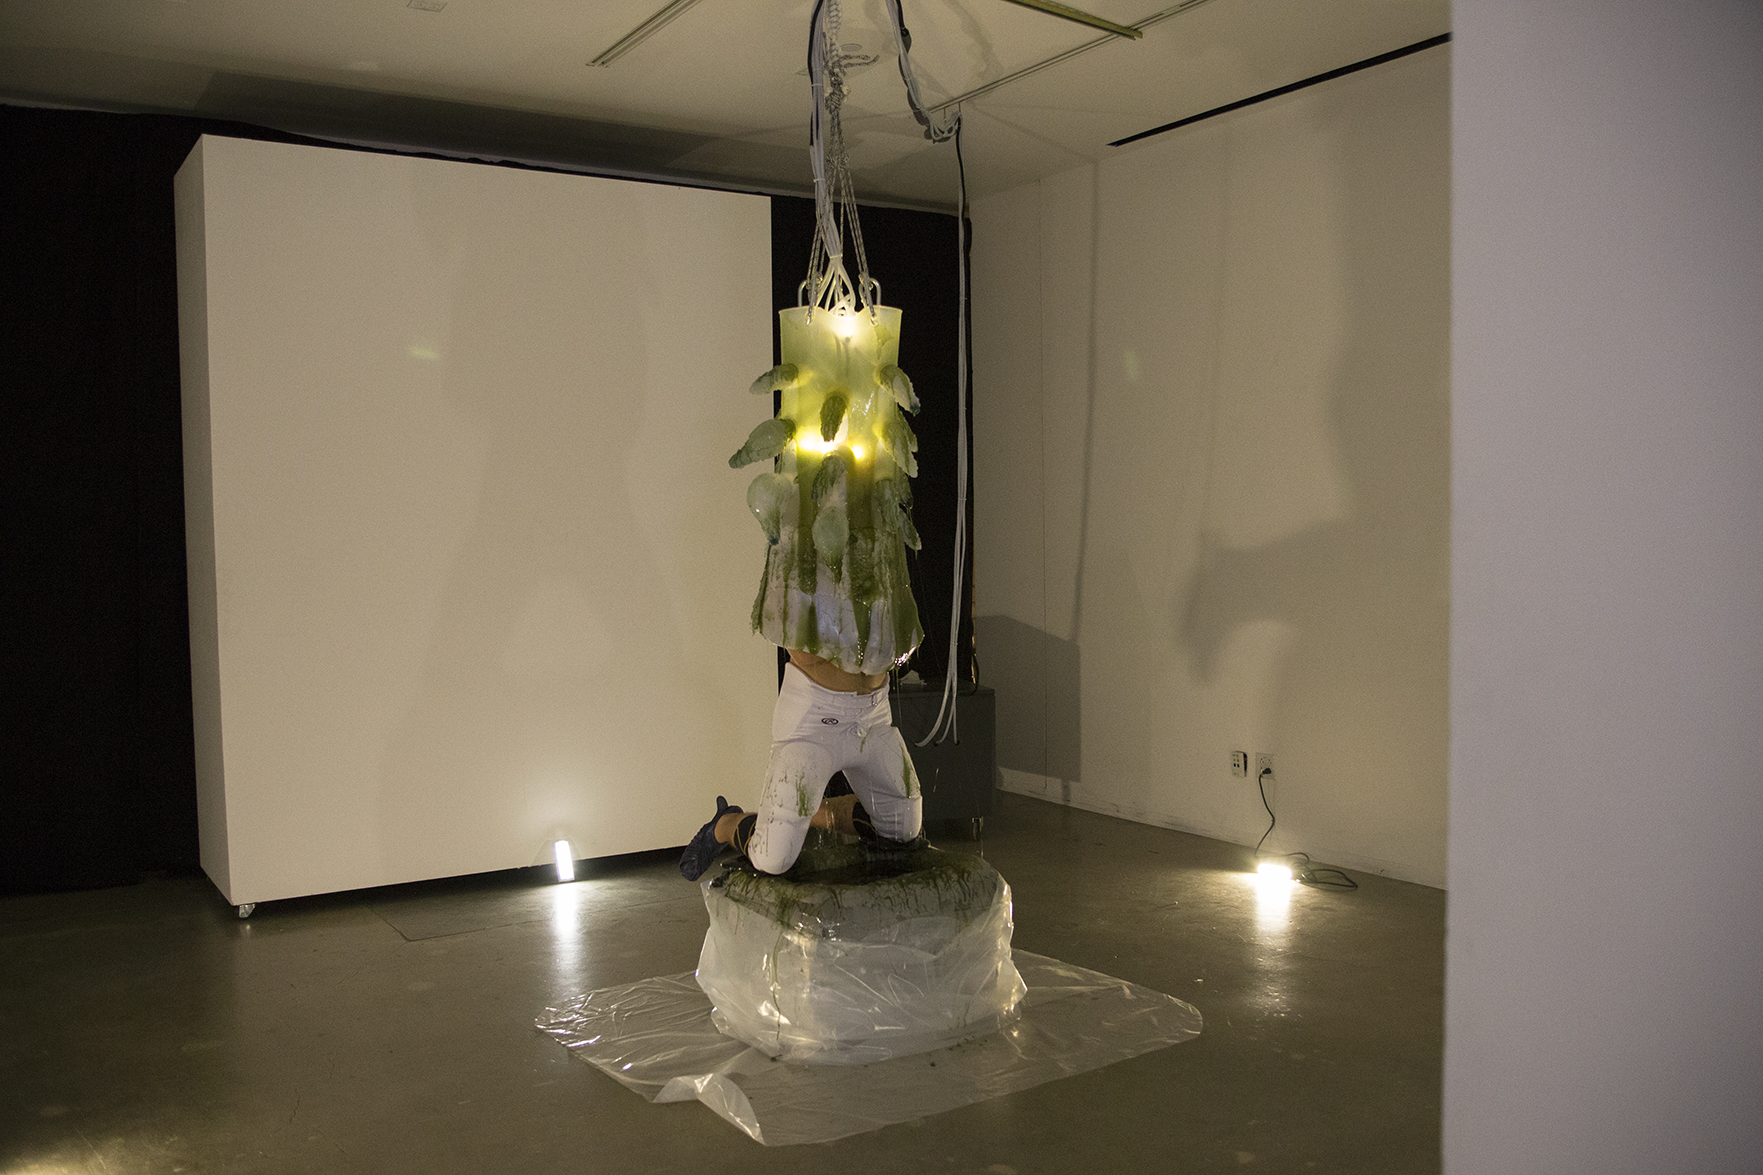 A man engulfed in a gelatenous form covered in tentacles knealing over a pool of green slime in a gallery